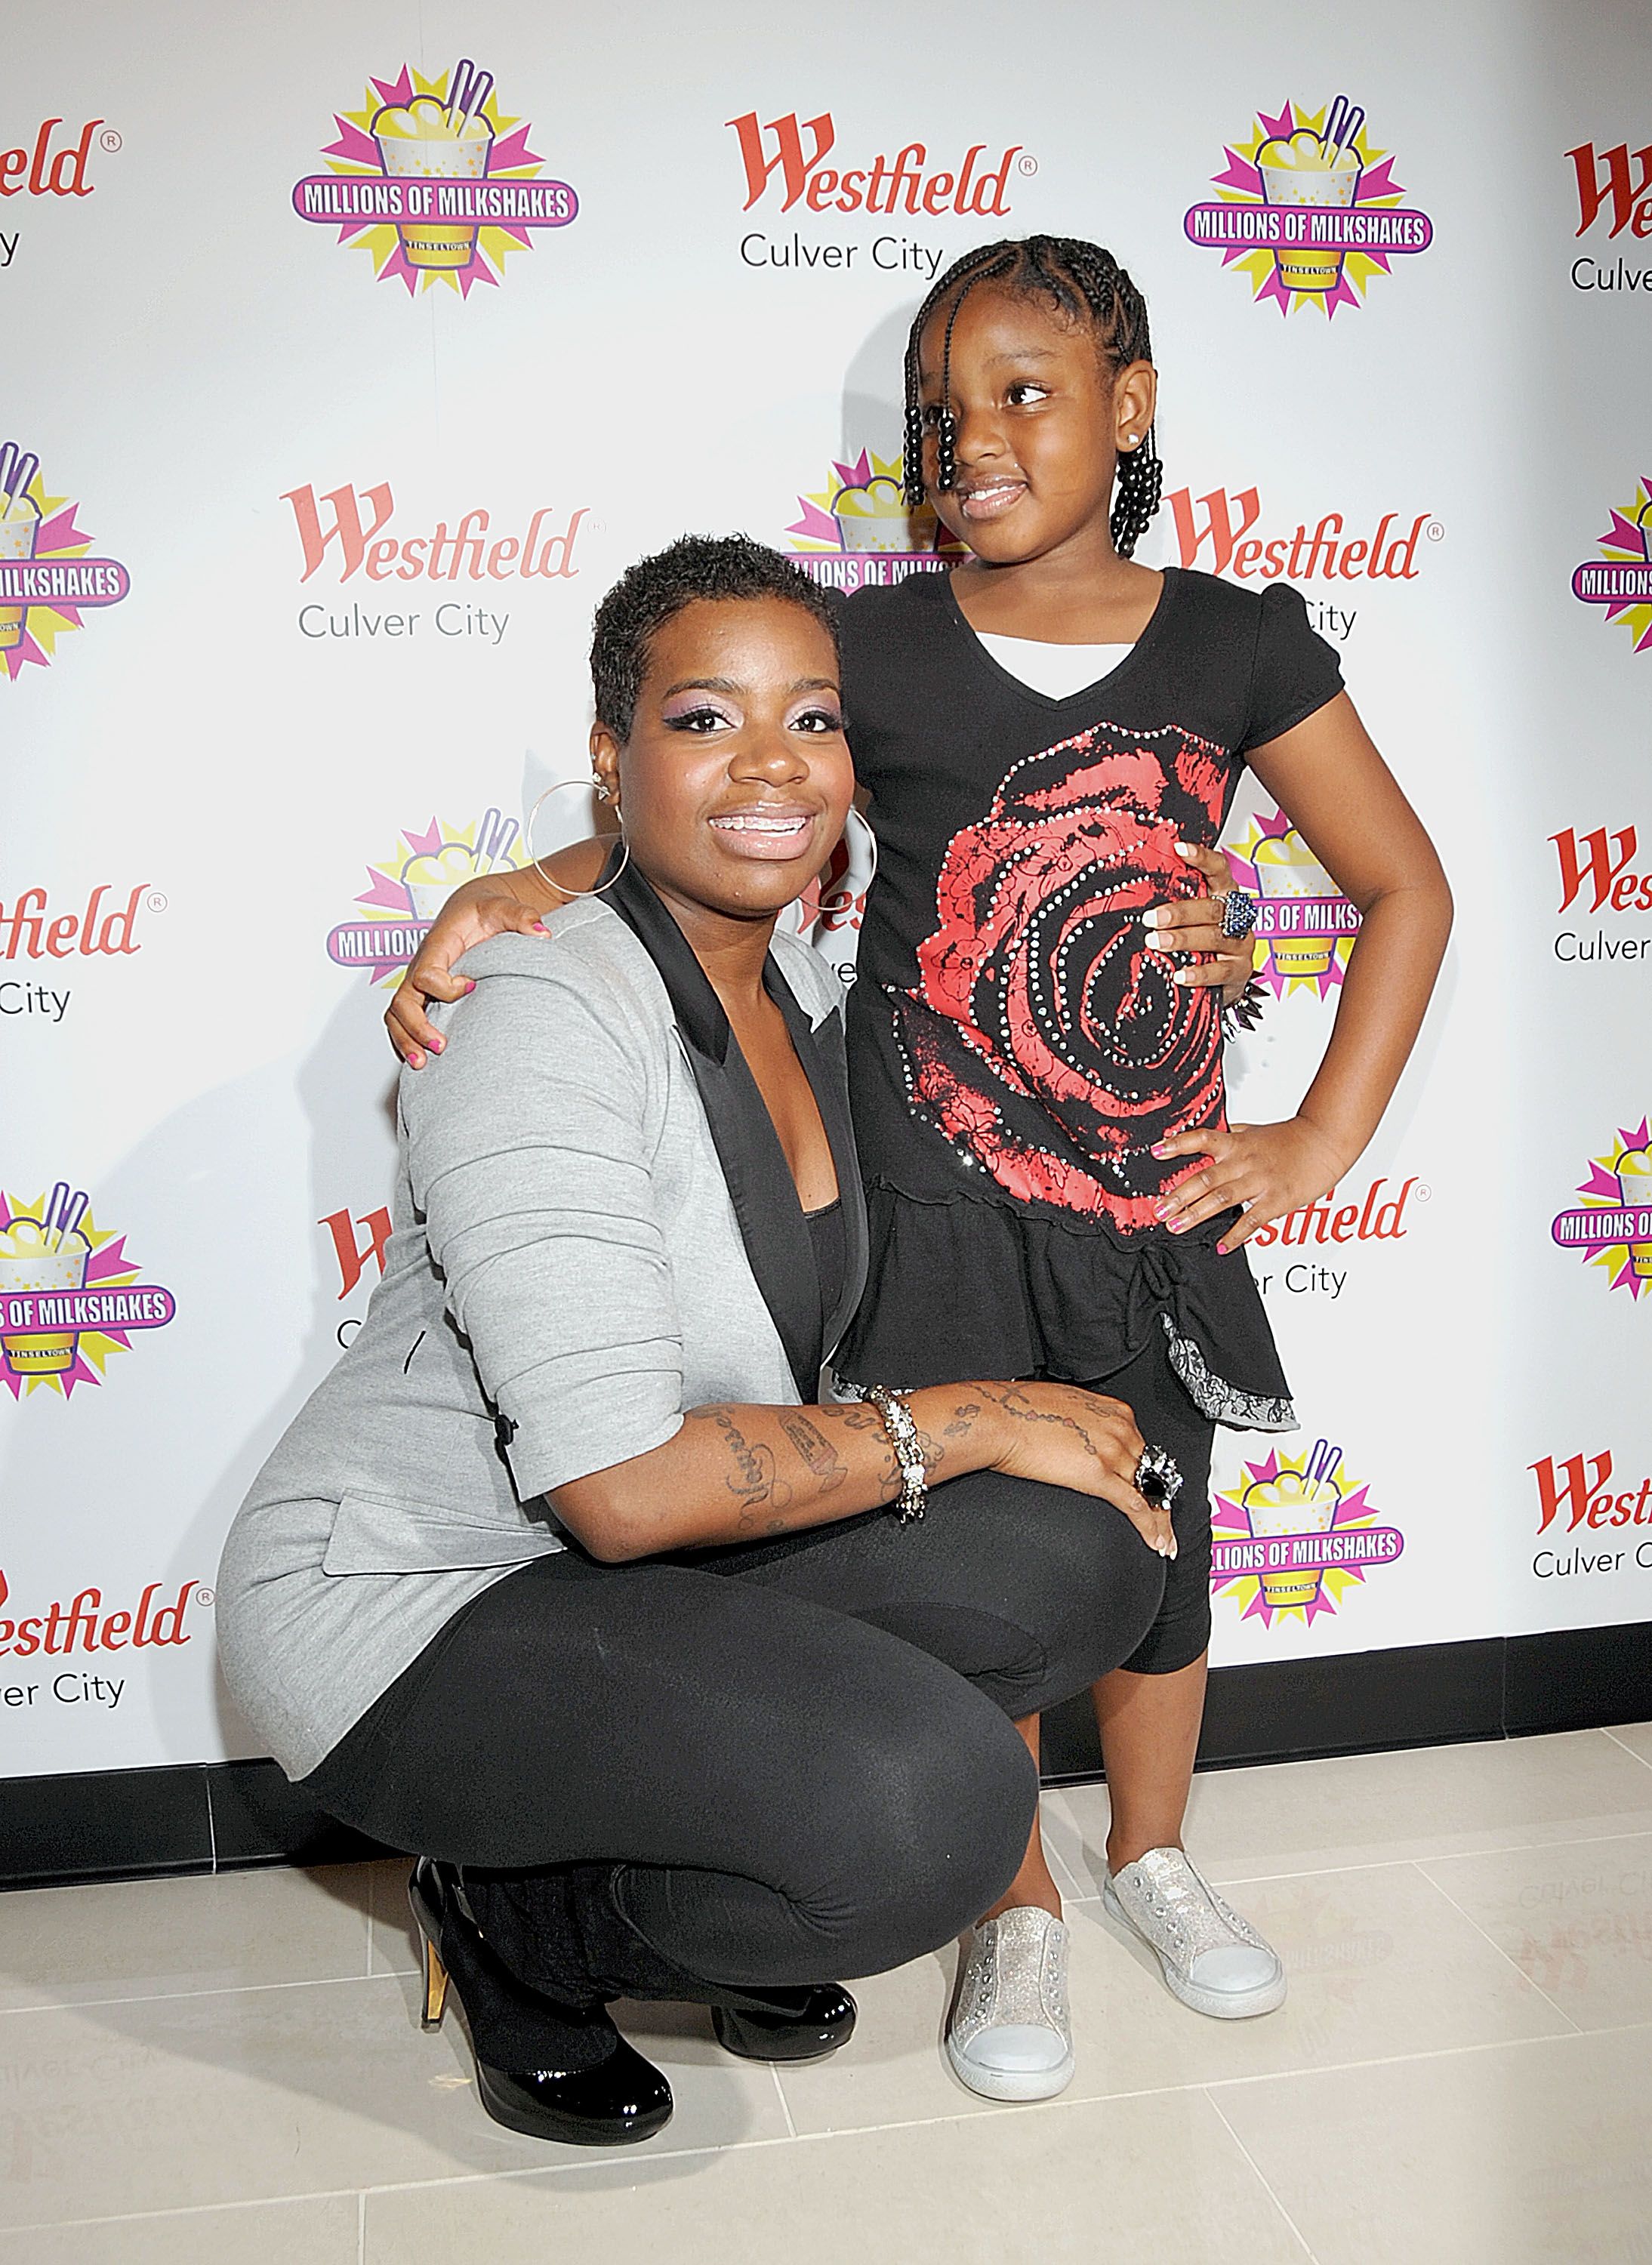 Fantasia Barrino attends a Millions of Milkshakes event at Westfield Culver City | Source: Getty Images/GlobalImagesUkraine